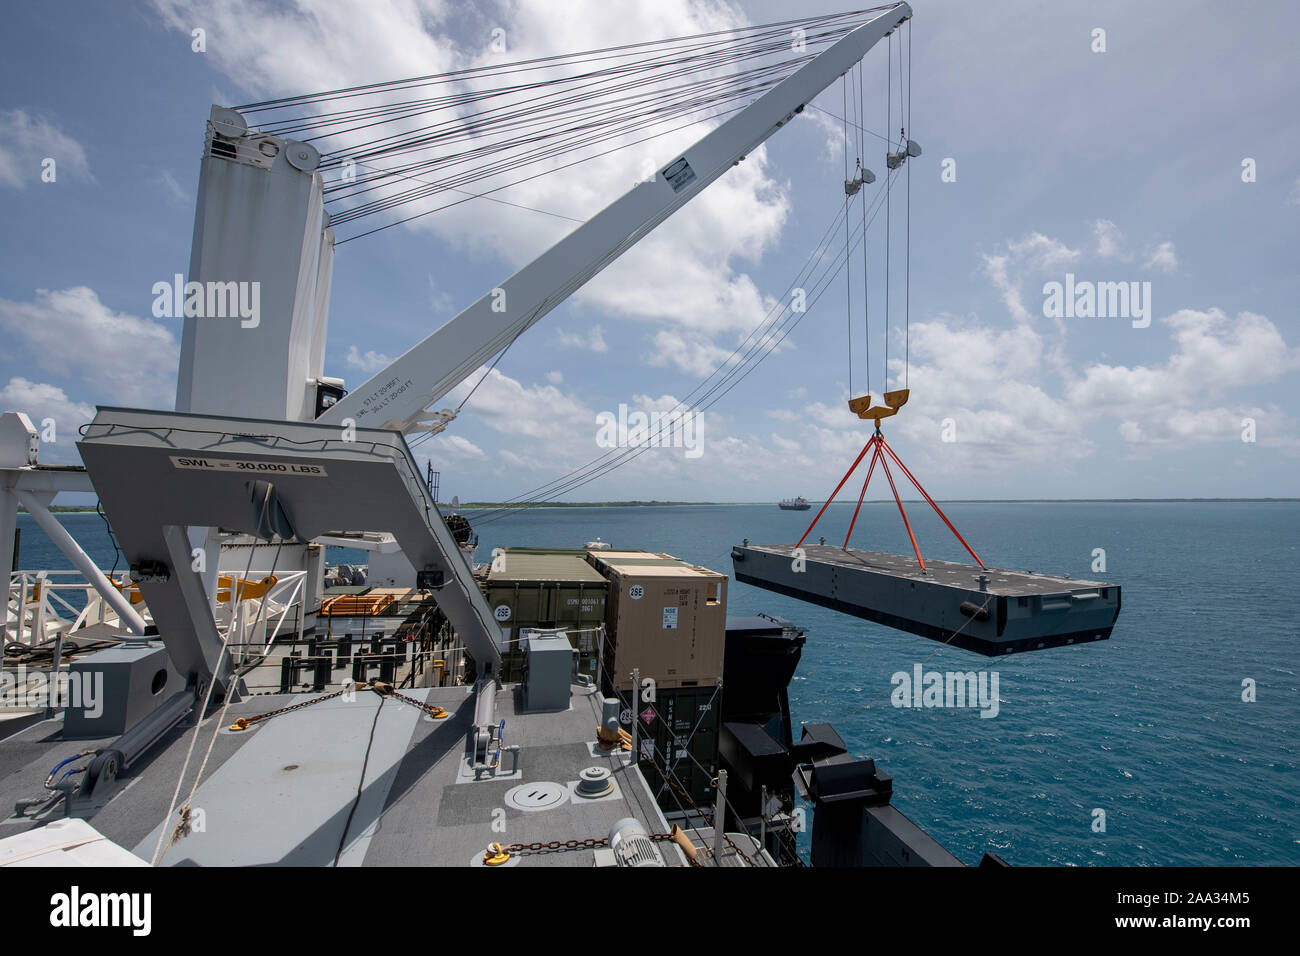 191113-N-CO914-1168  DIEGO GARCIA, British Indian Ocean Territory (November 13, 2019) An Improved Navy Lighterage System (INLS) Intermediate Module is offloaded by a crane aboard Military Sealift Command Bob Hope-class roll-on roll-off vehicle cargo ship USNS Seay (T-AKR 302) during an INLS training mission. Navy Cargo Handling Battalion (NCHB) 1, NCHB 8, NCHB 11, NCHB 13, Assault Craft Unit (ACU) 1 and Amphibious Construction Battalion (ACB) 1 are participating in the INLS training mission under the direction of Commander, Task Force (CTF) 75 in preparation for upcoming joint cargo handling e Stock Photo